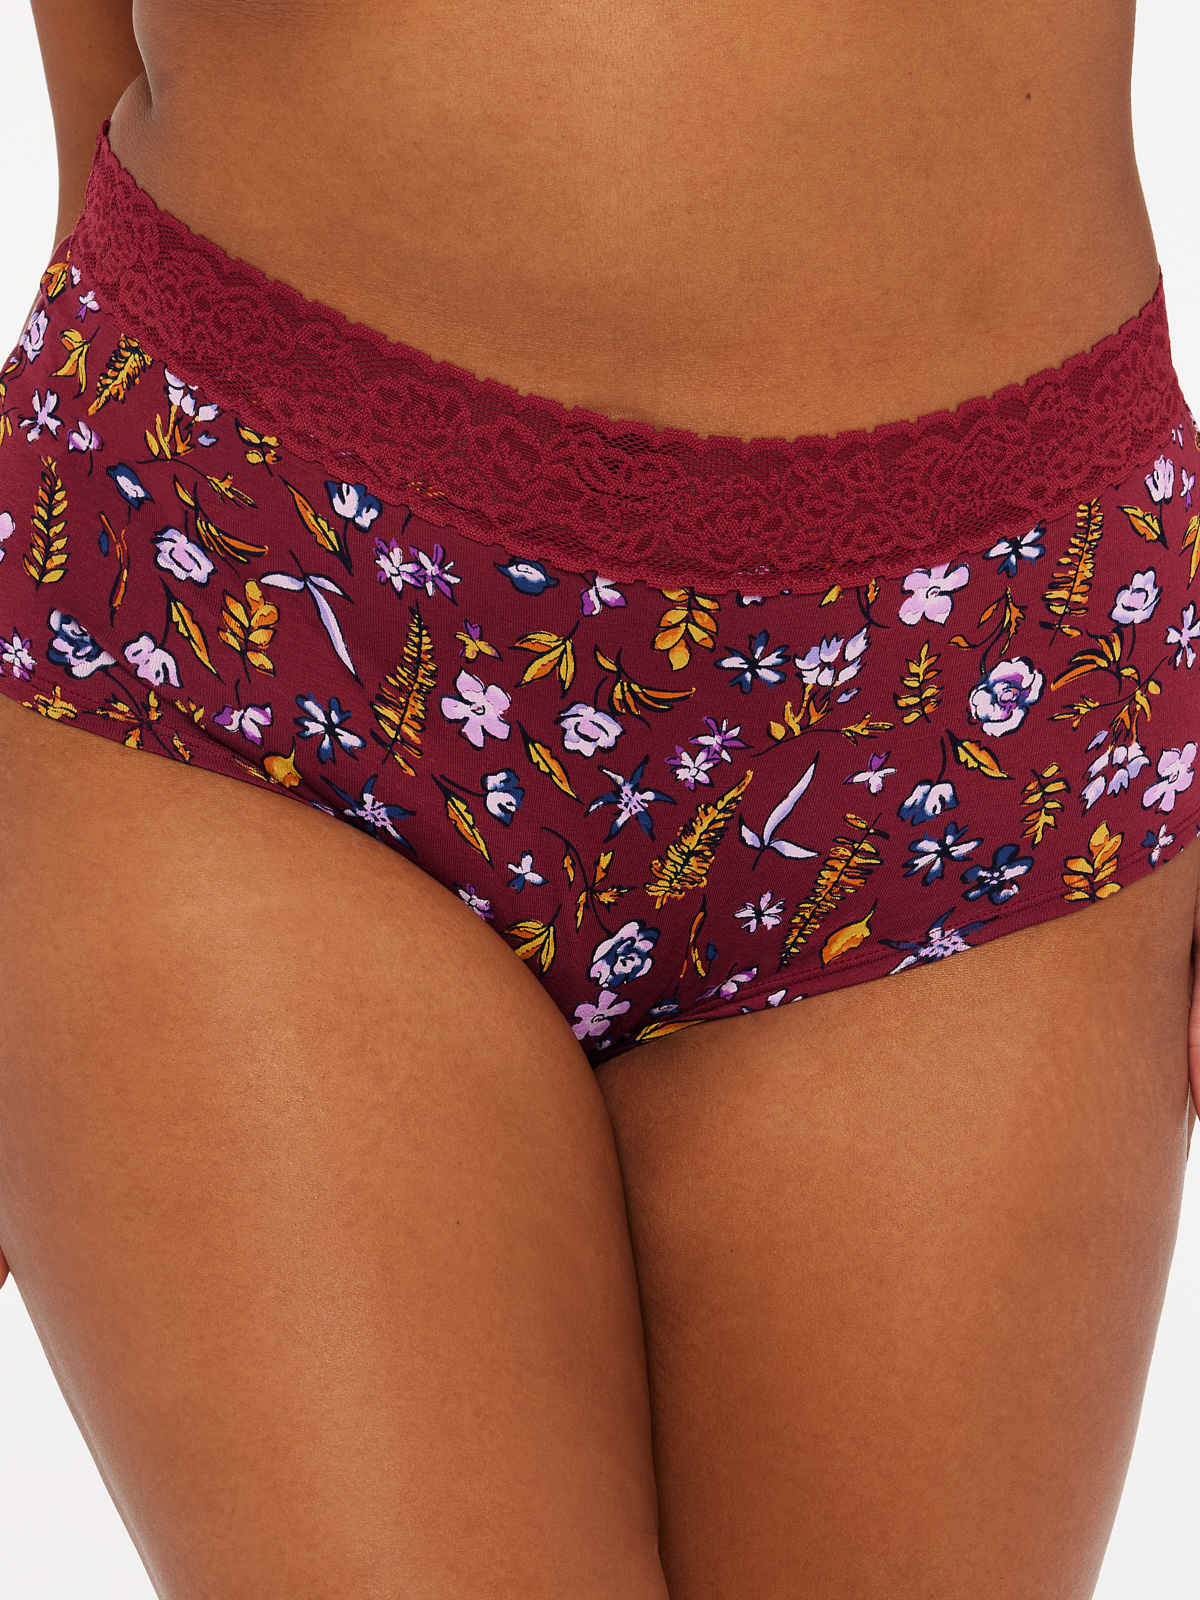 Cotton Essentials Lace-Trim Boy Short Panty in Multi & Red